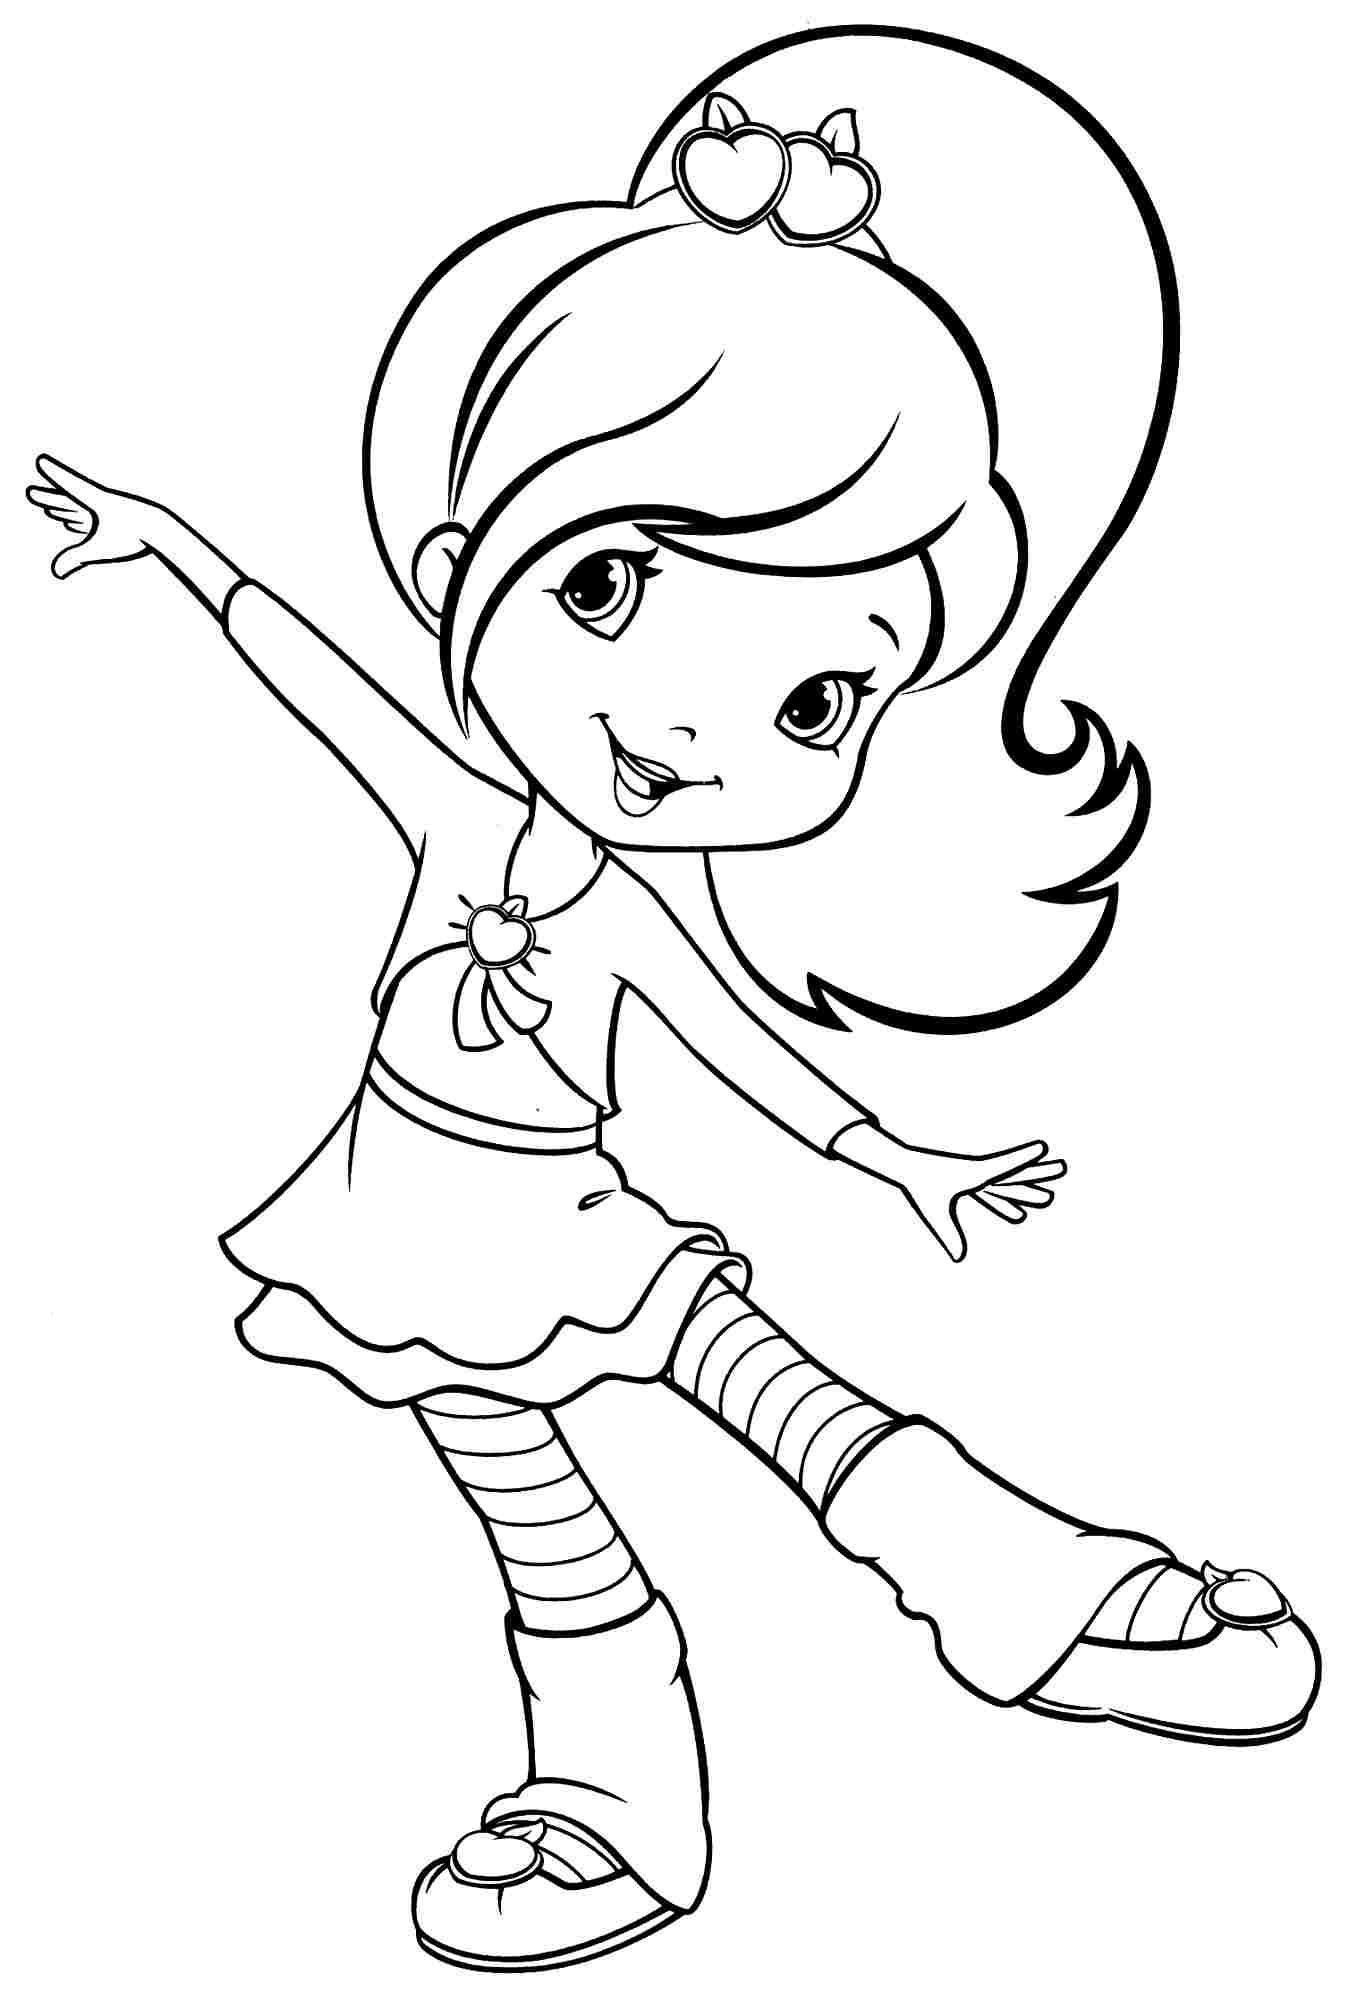 Girls Coloring Pages For Kids
 Coloring Pages for Girls Best Coloring Pages For Kids